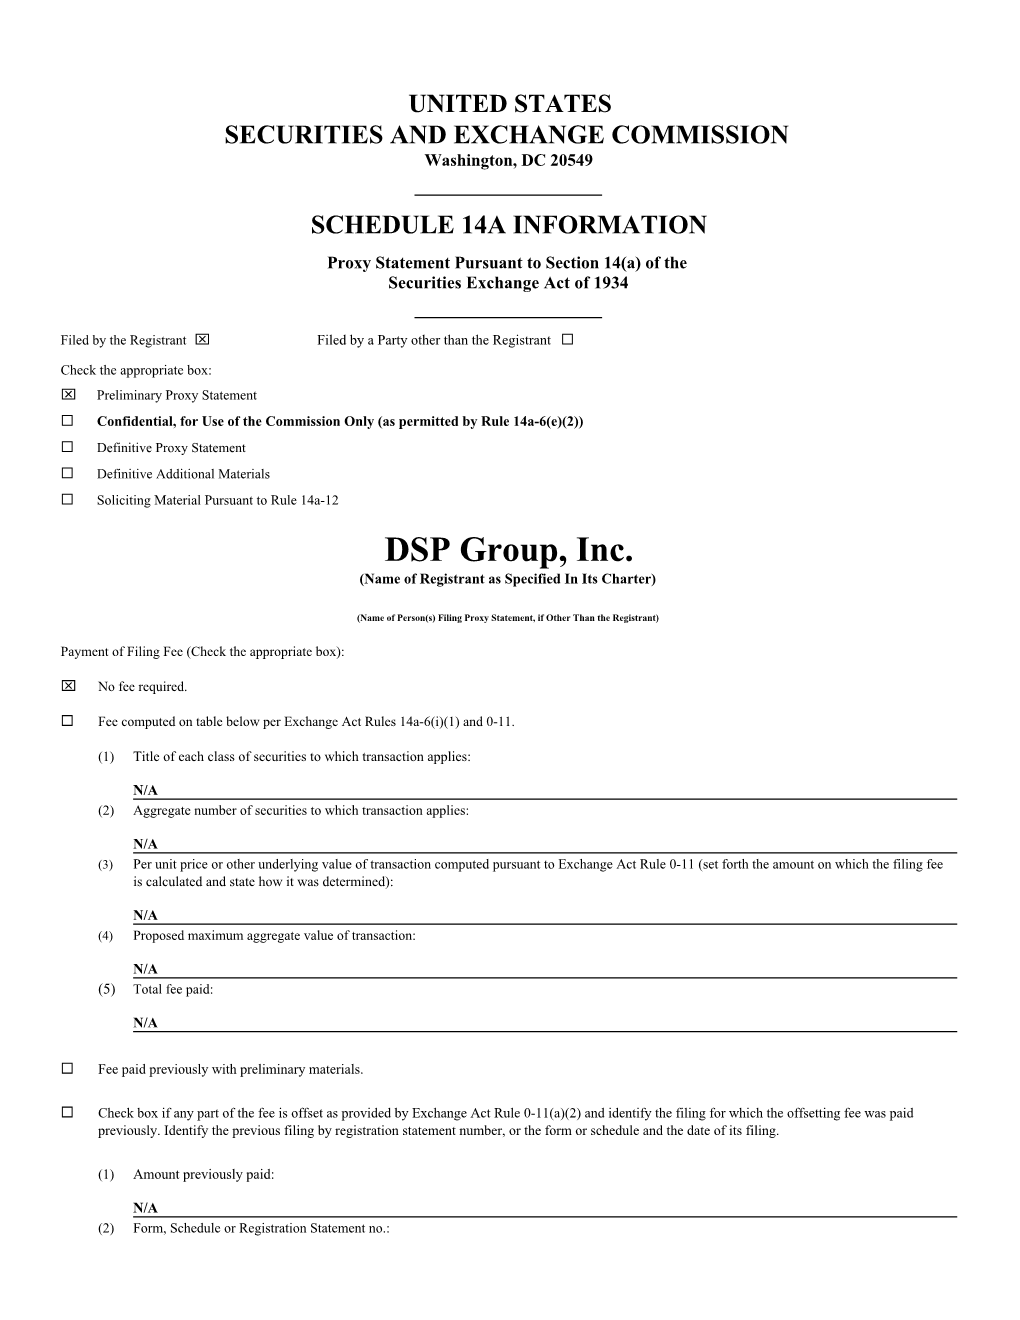 DSP Group, Inc. (Name of Registrant As Specified in Its Charter)